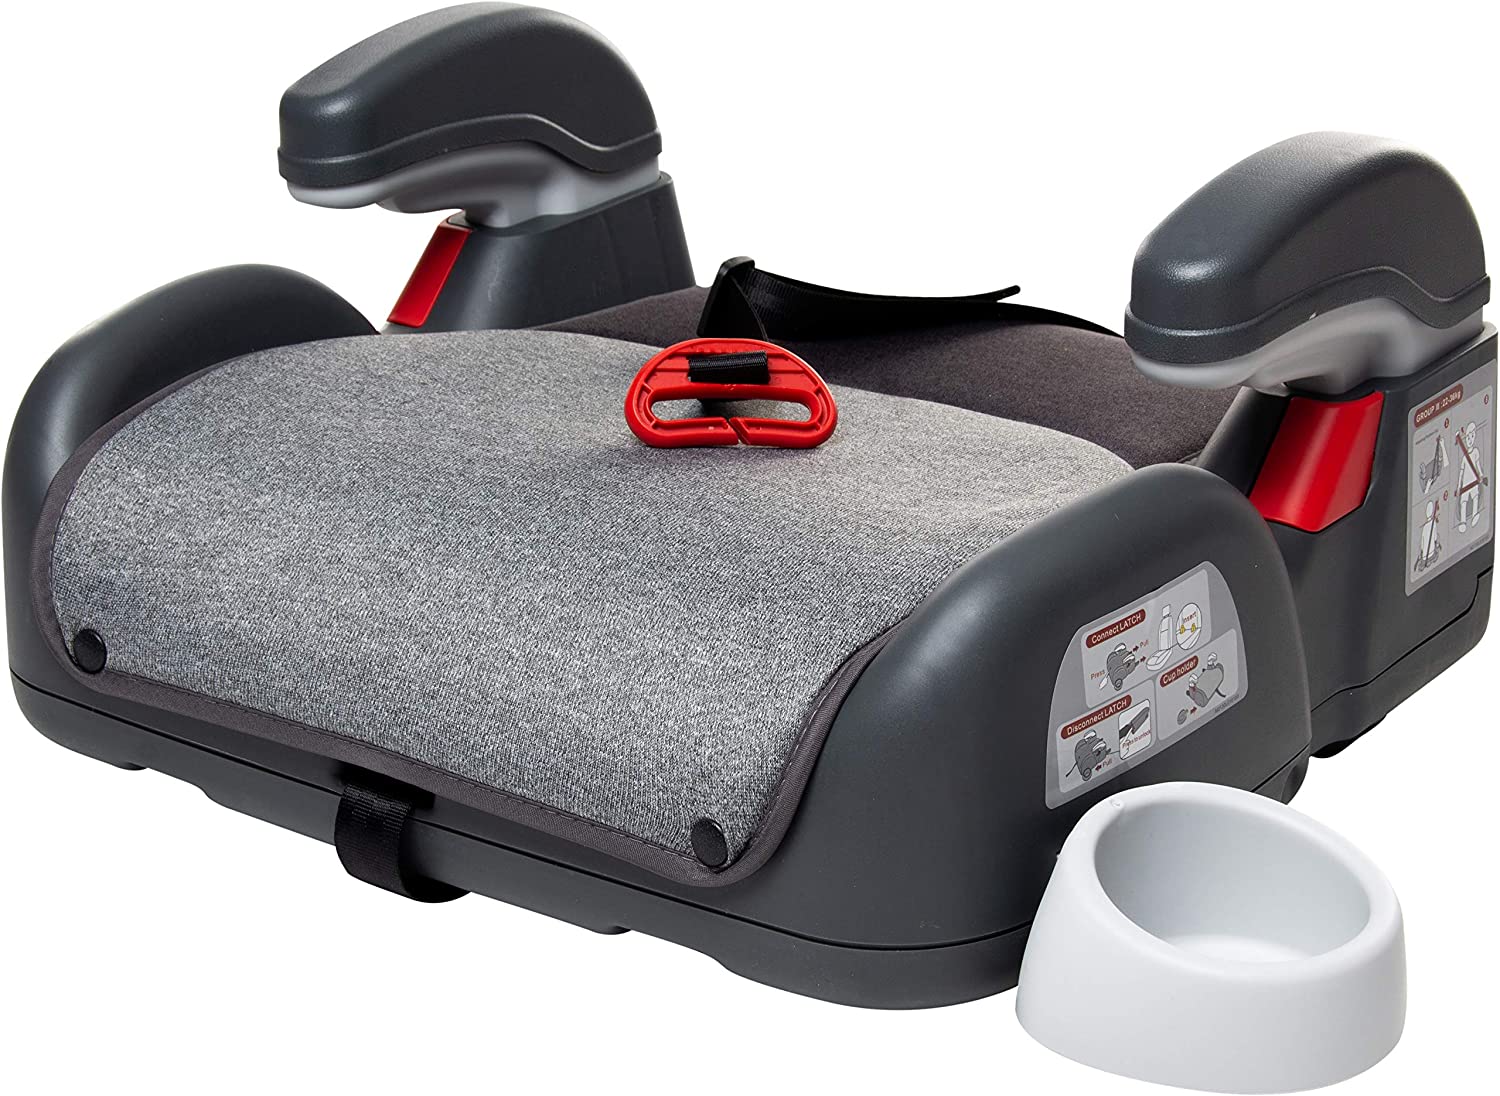 Osann Fun Isofix Hybrid Child Booster Seat with Cup Holder ECE Group 3 (22-36 kg)